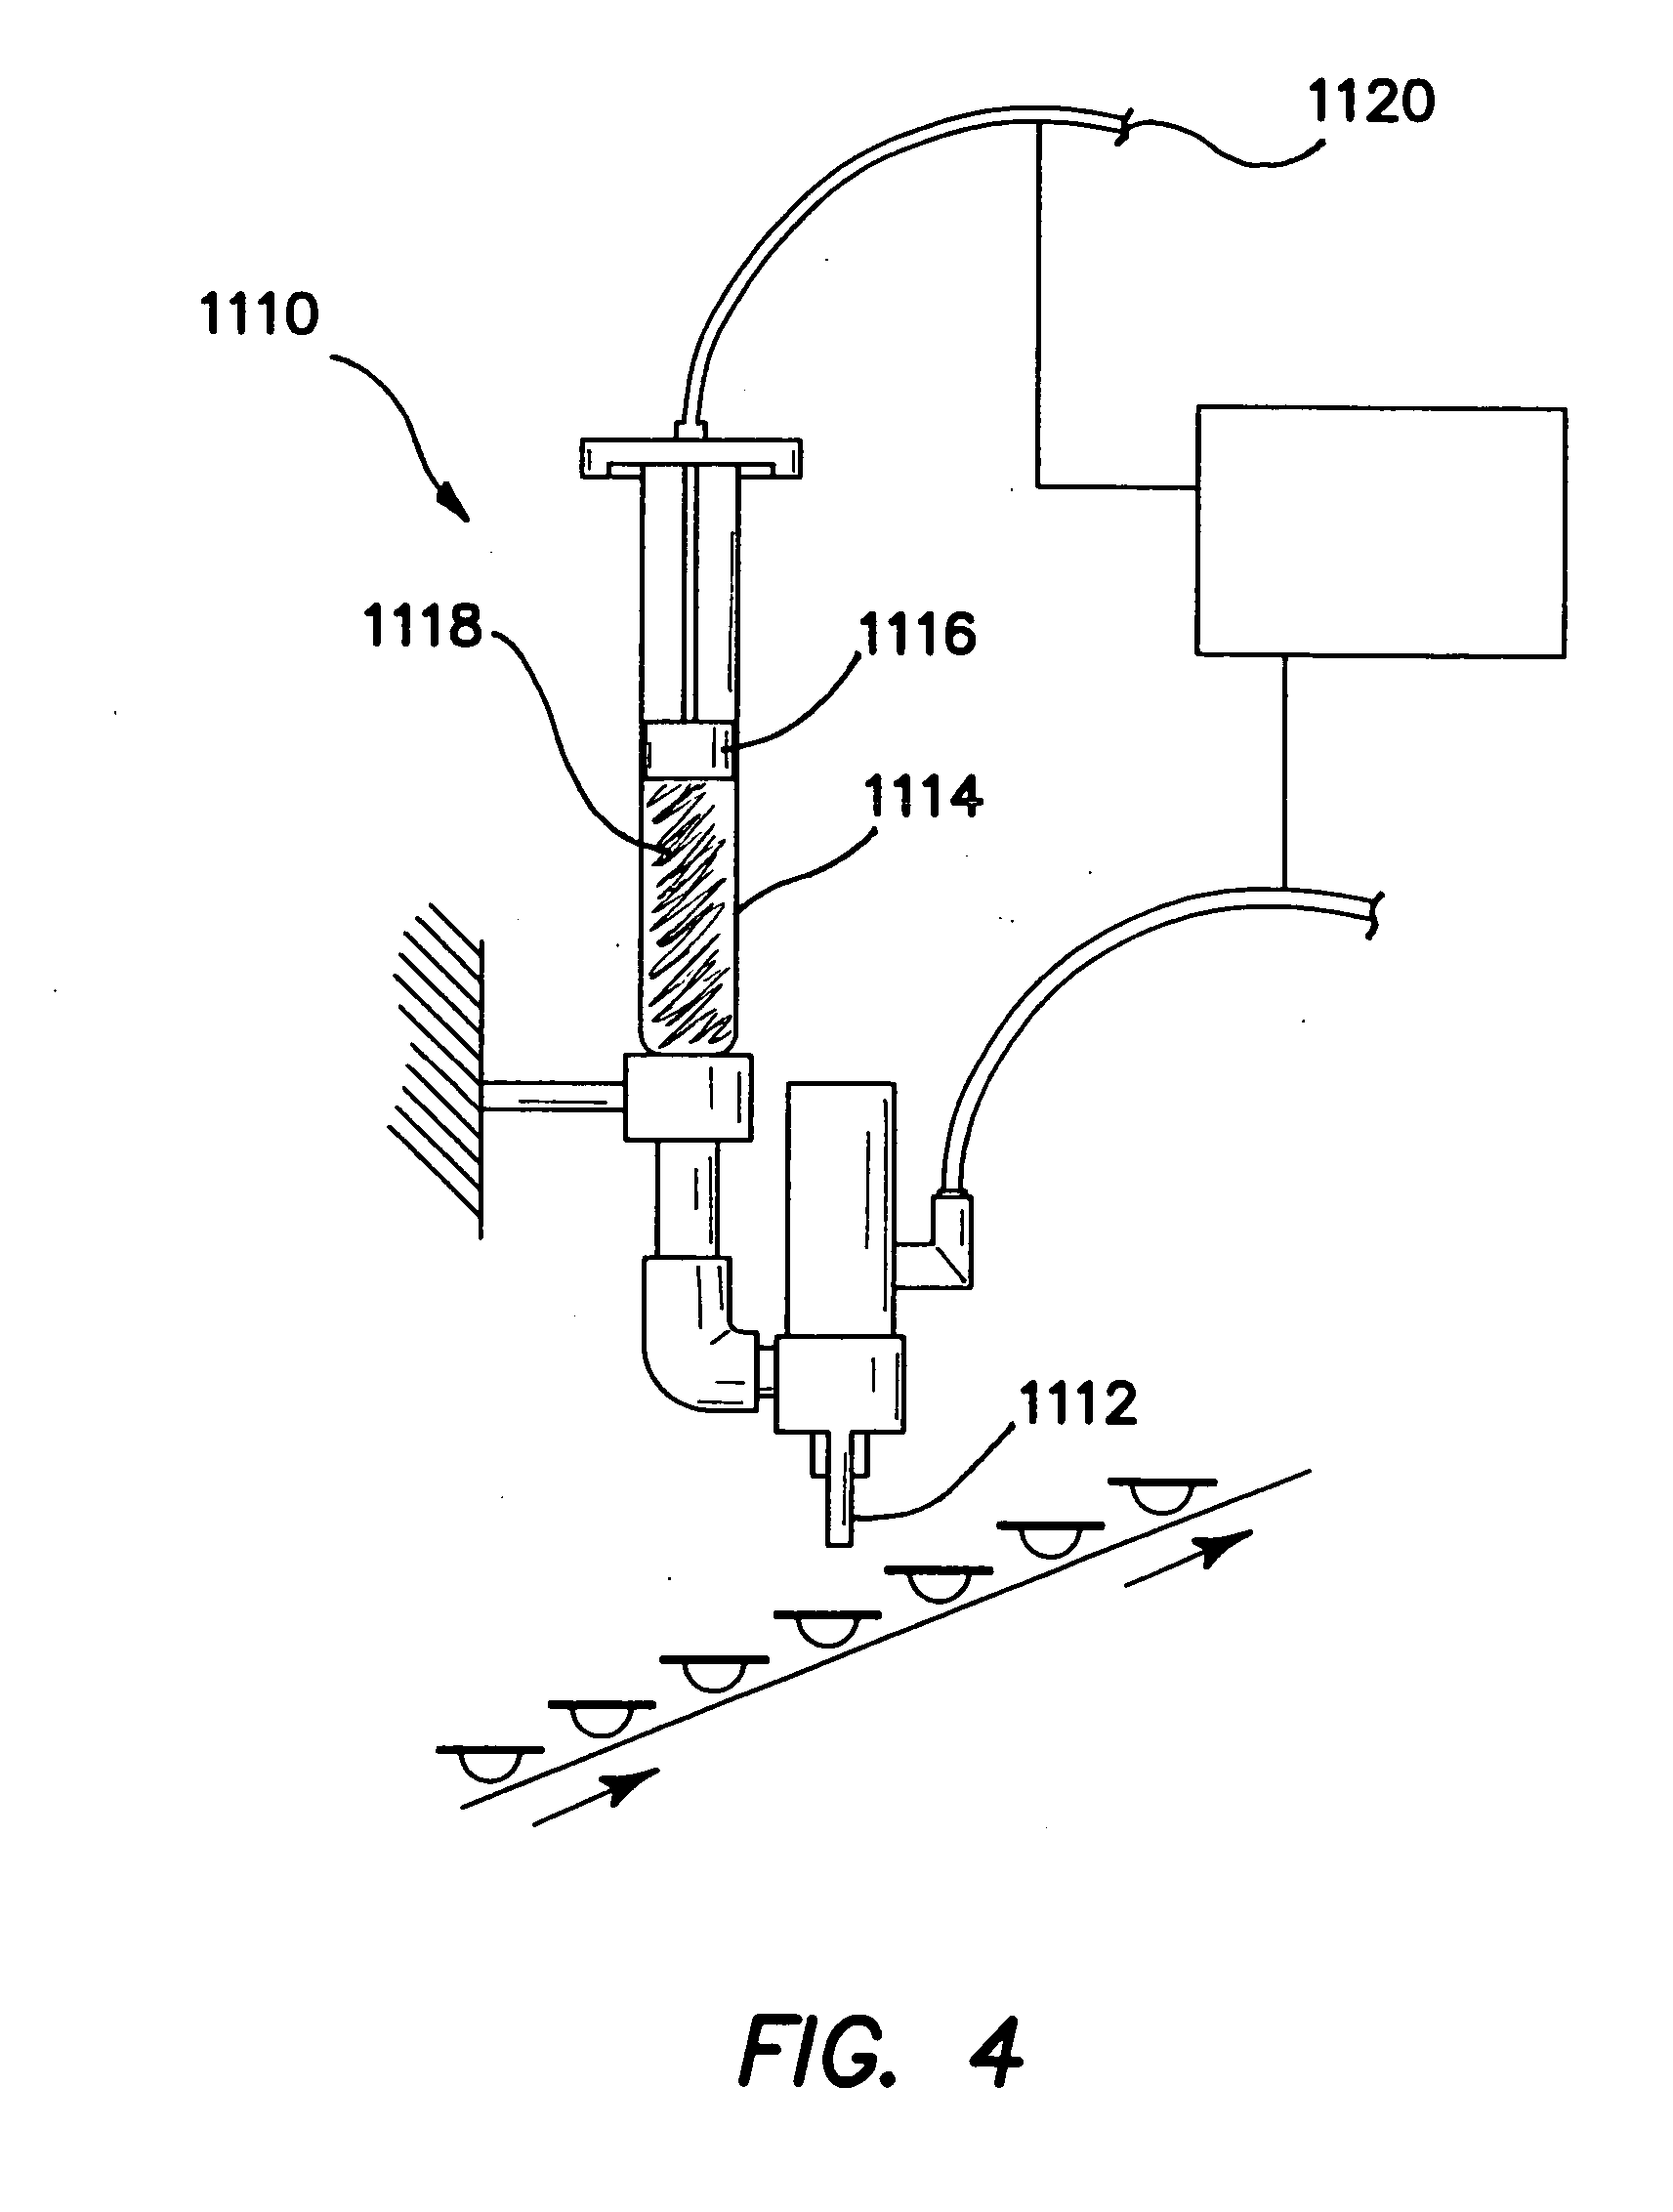 Systems and methods for producing silicone hydrogel contact lenses